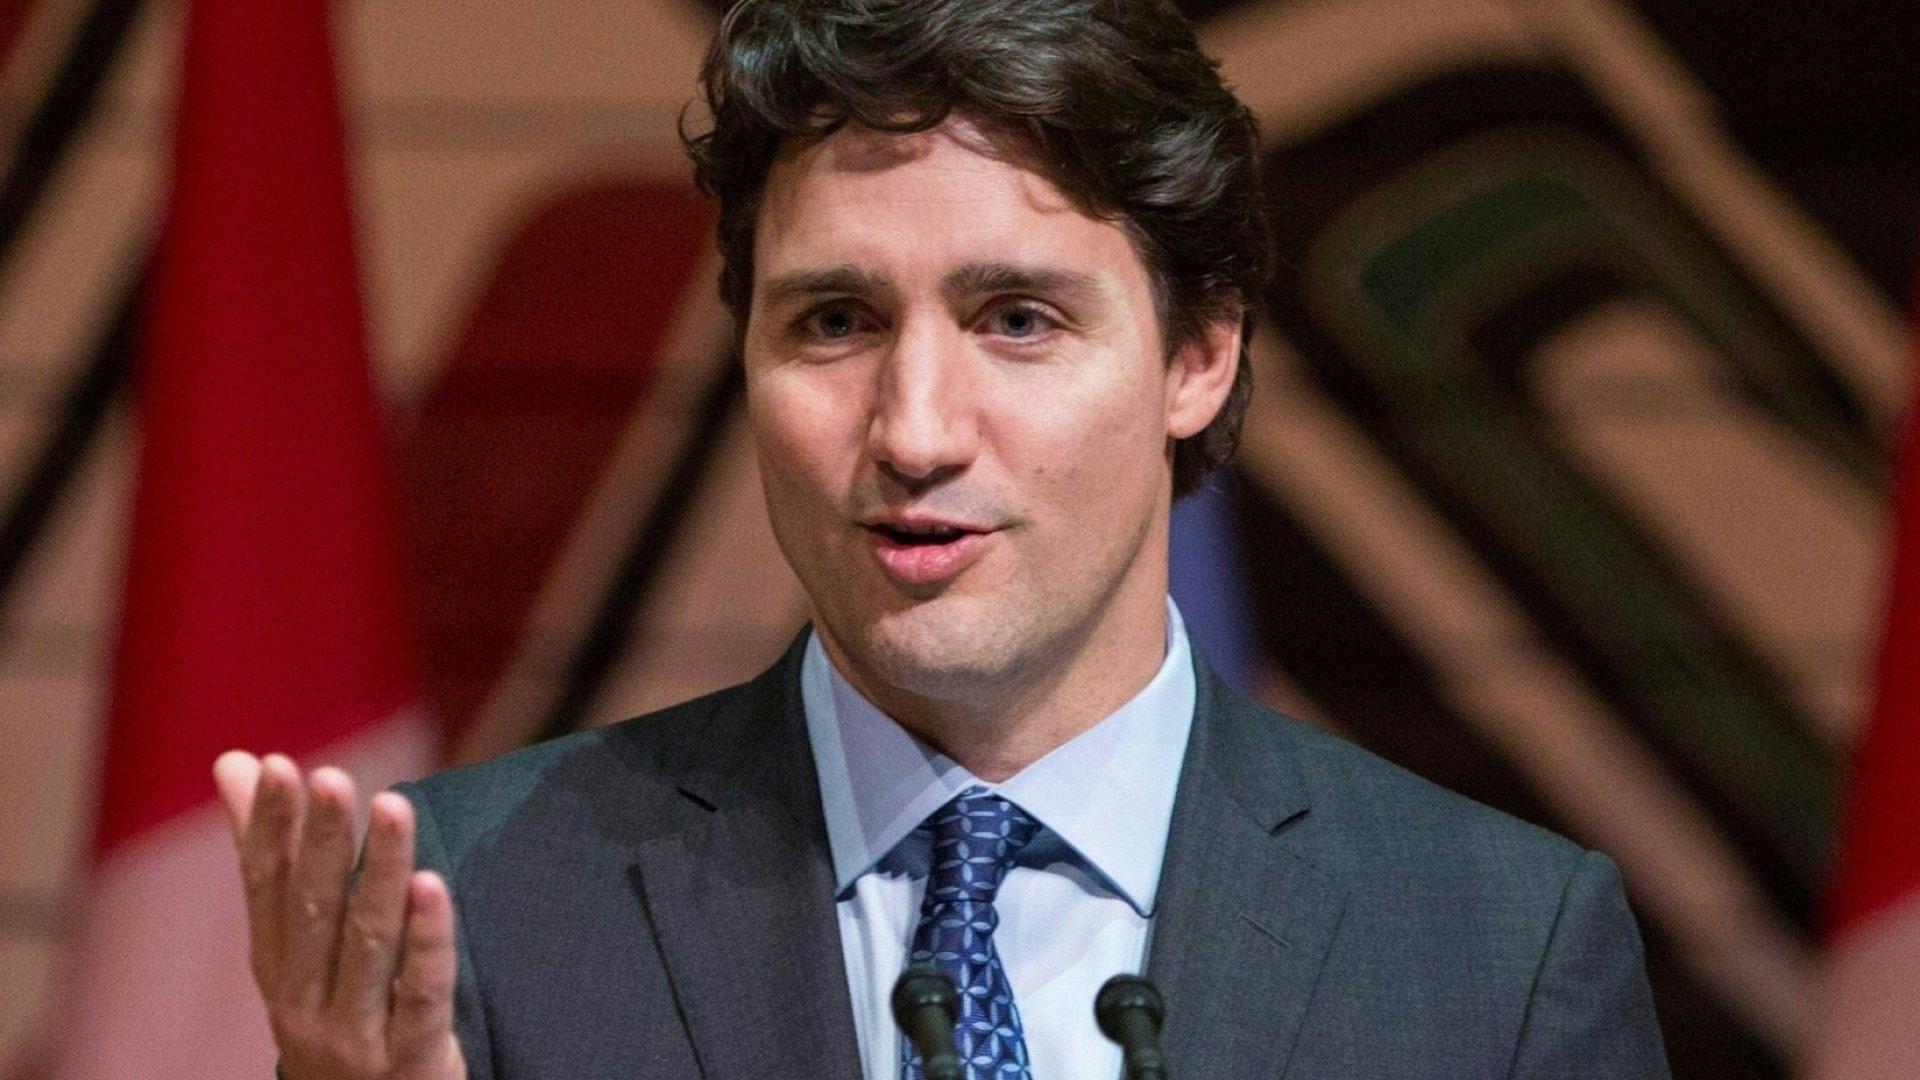 Justin Trudeau's biography